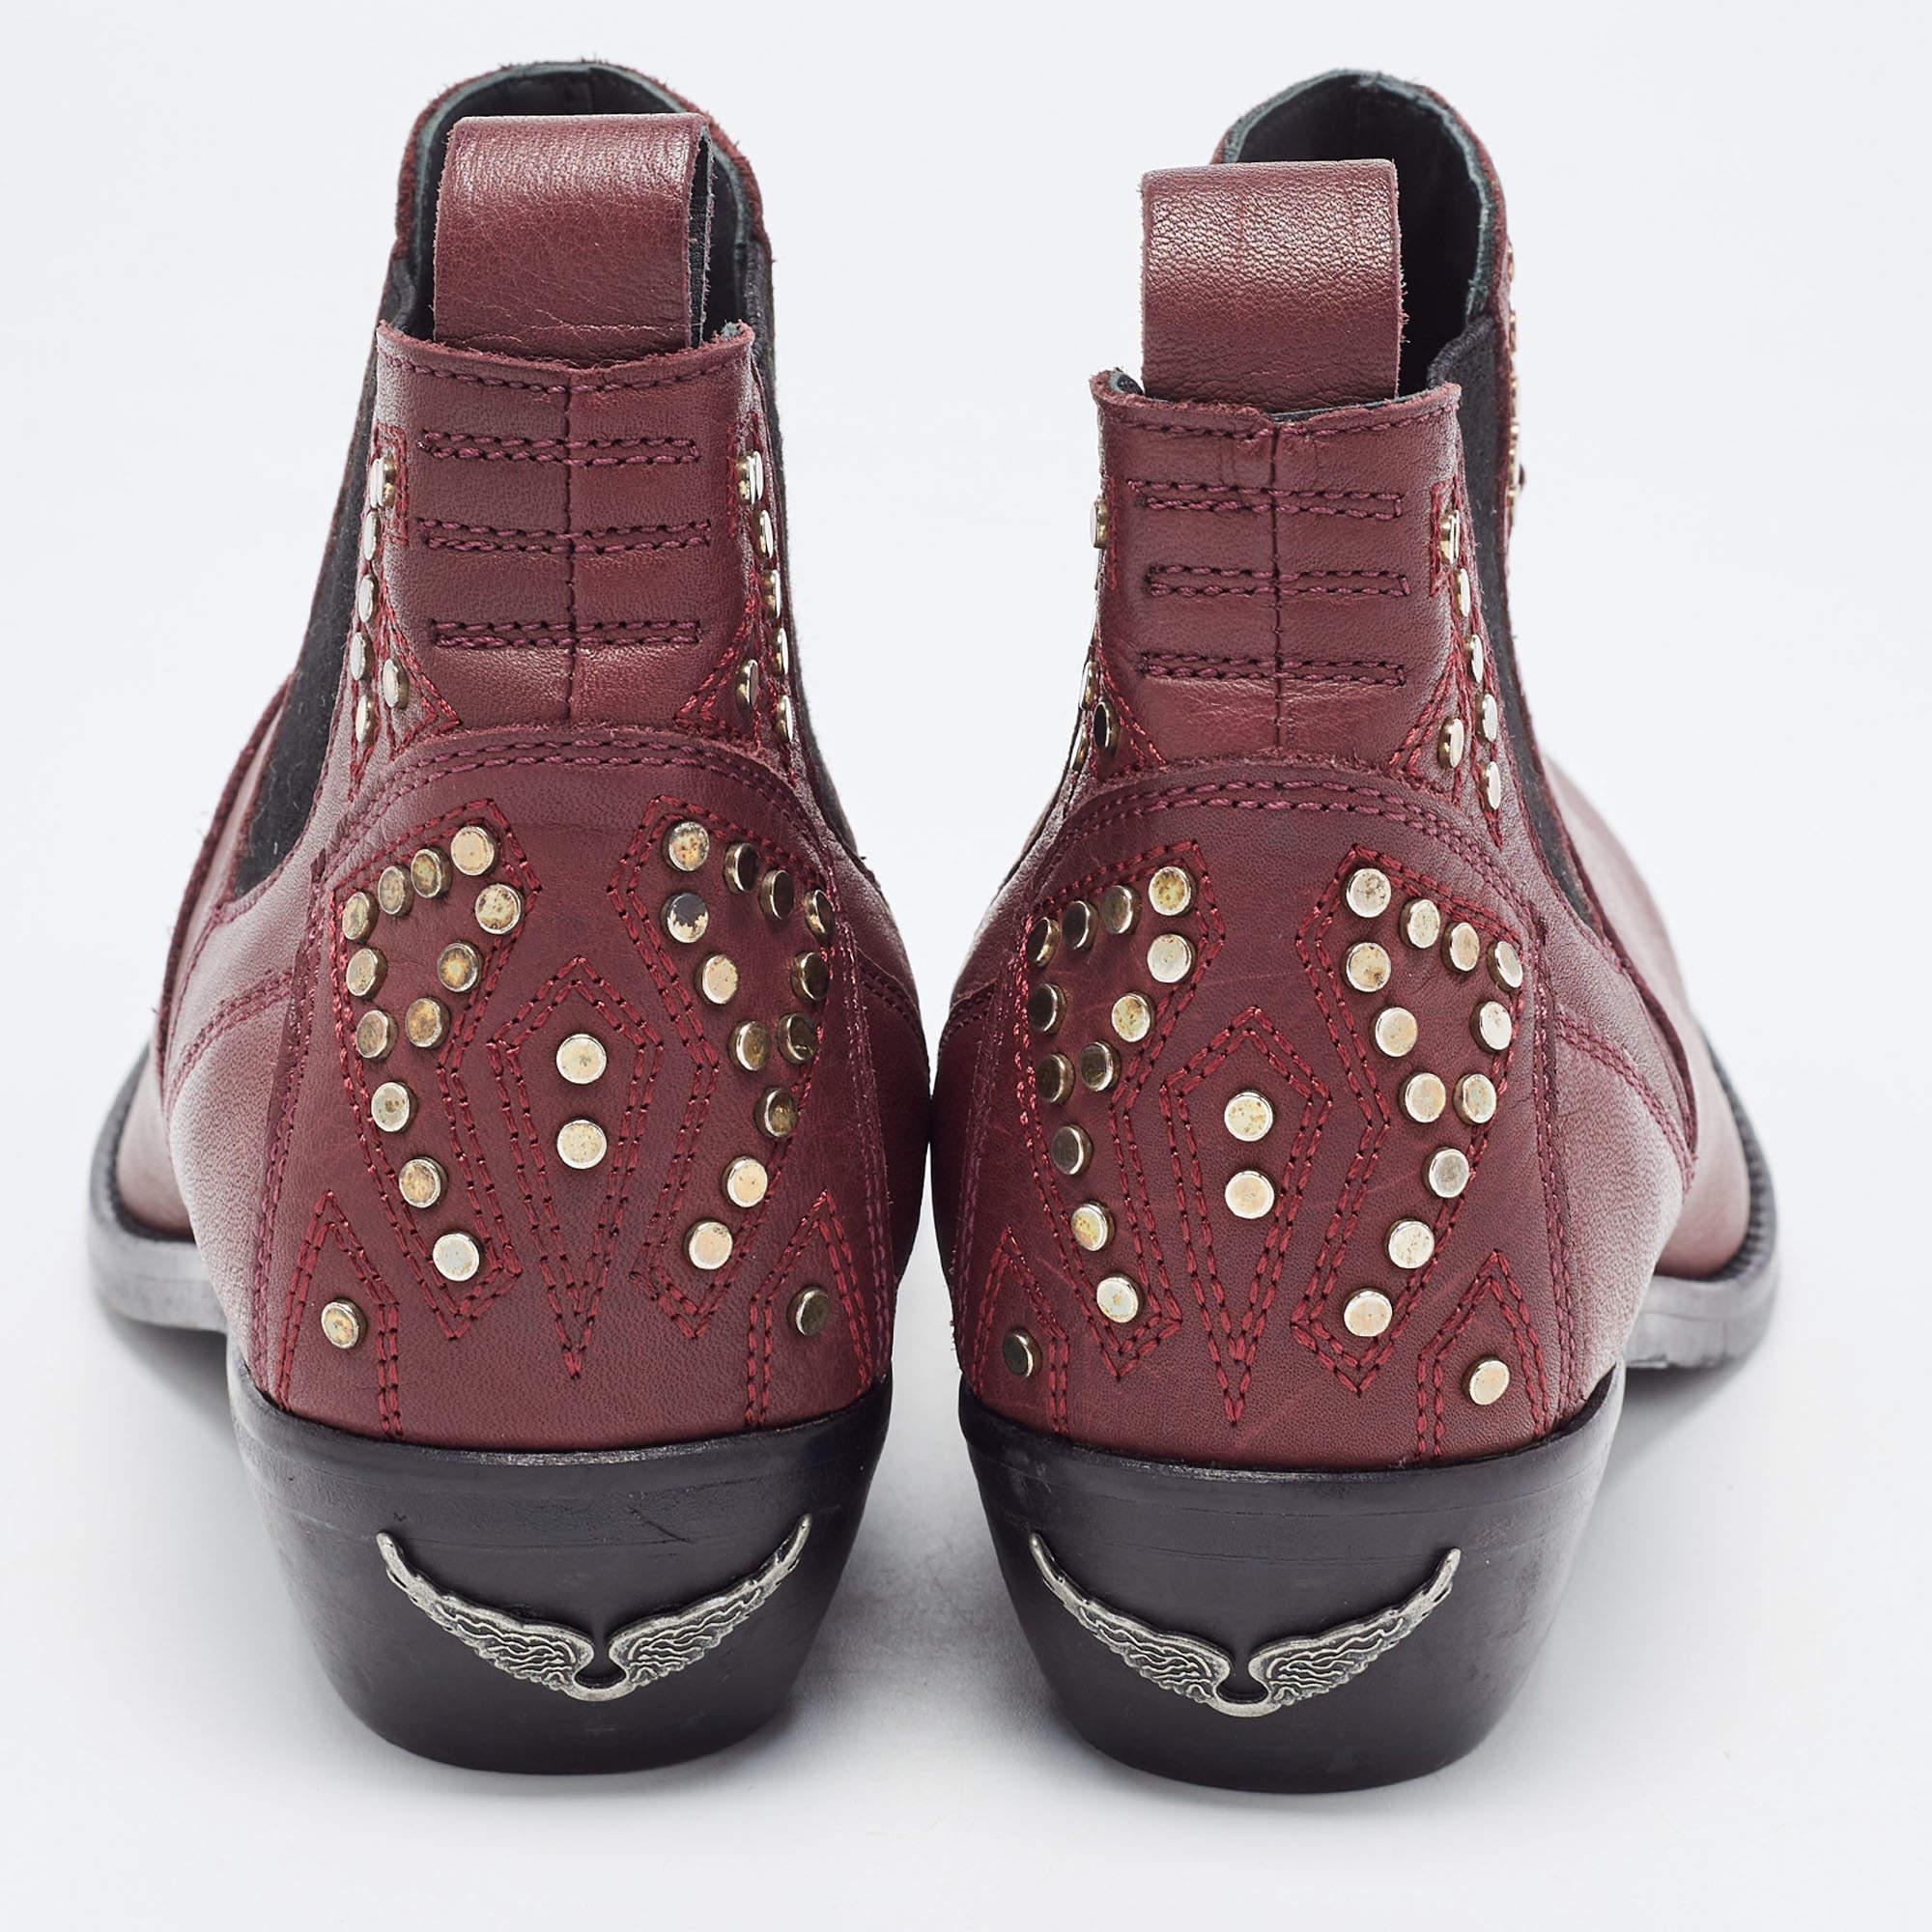 Zadig & Voltaire Burgundy Leather Ankle Boots Size 37 5